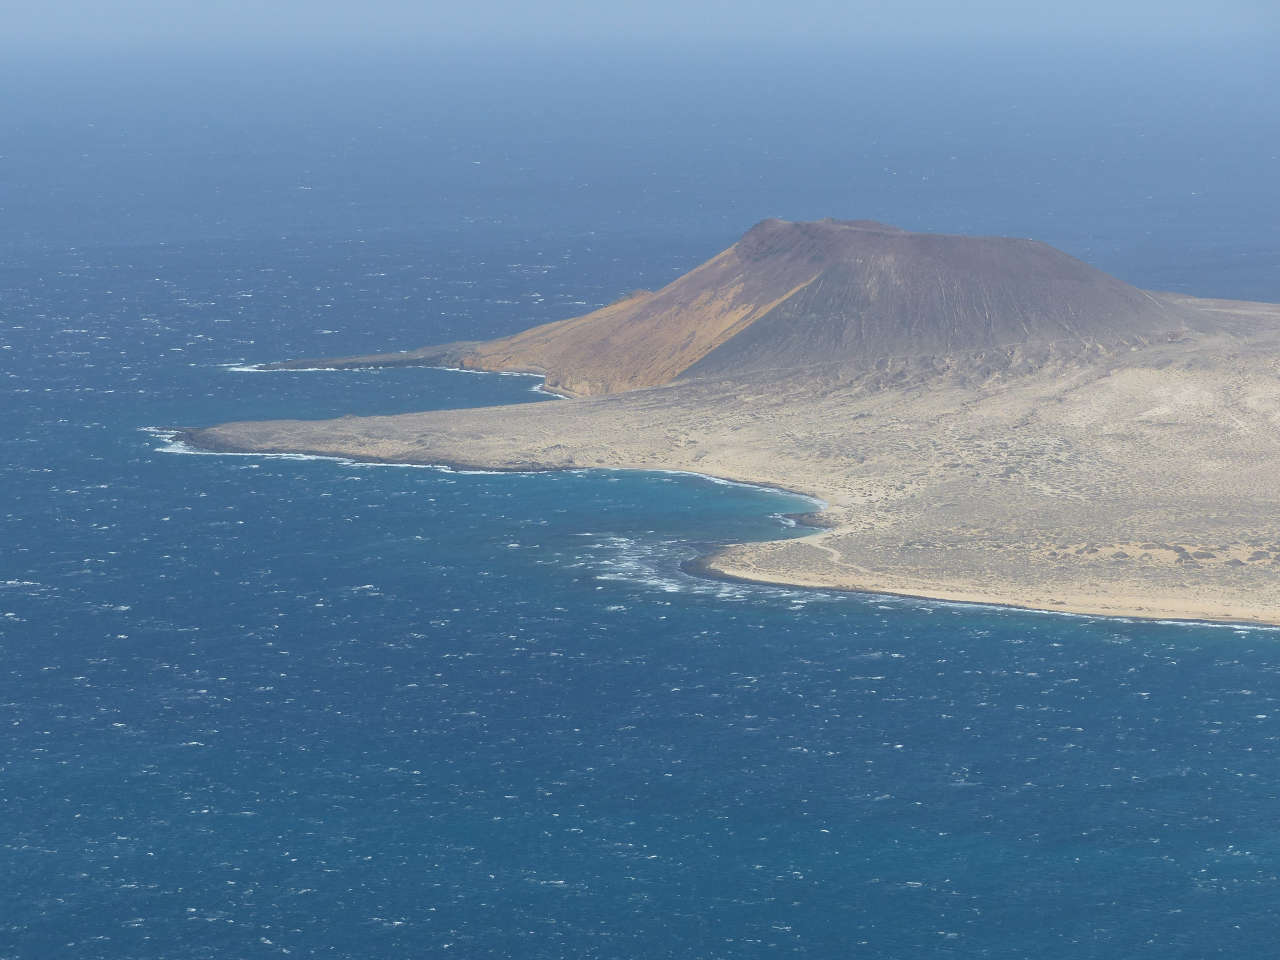 An island viewed from a great height, white caps on the waves